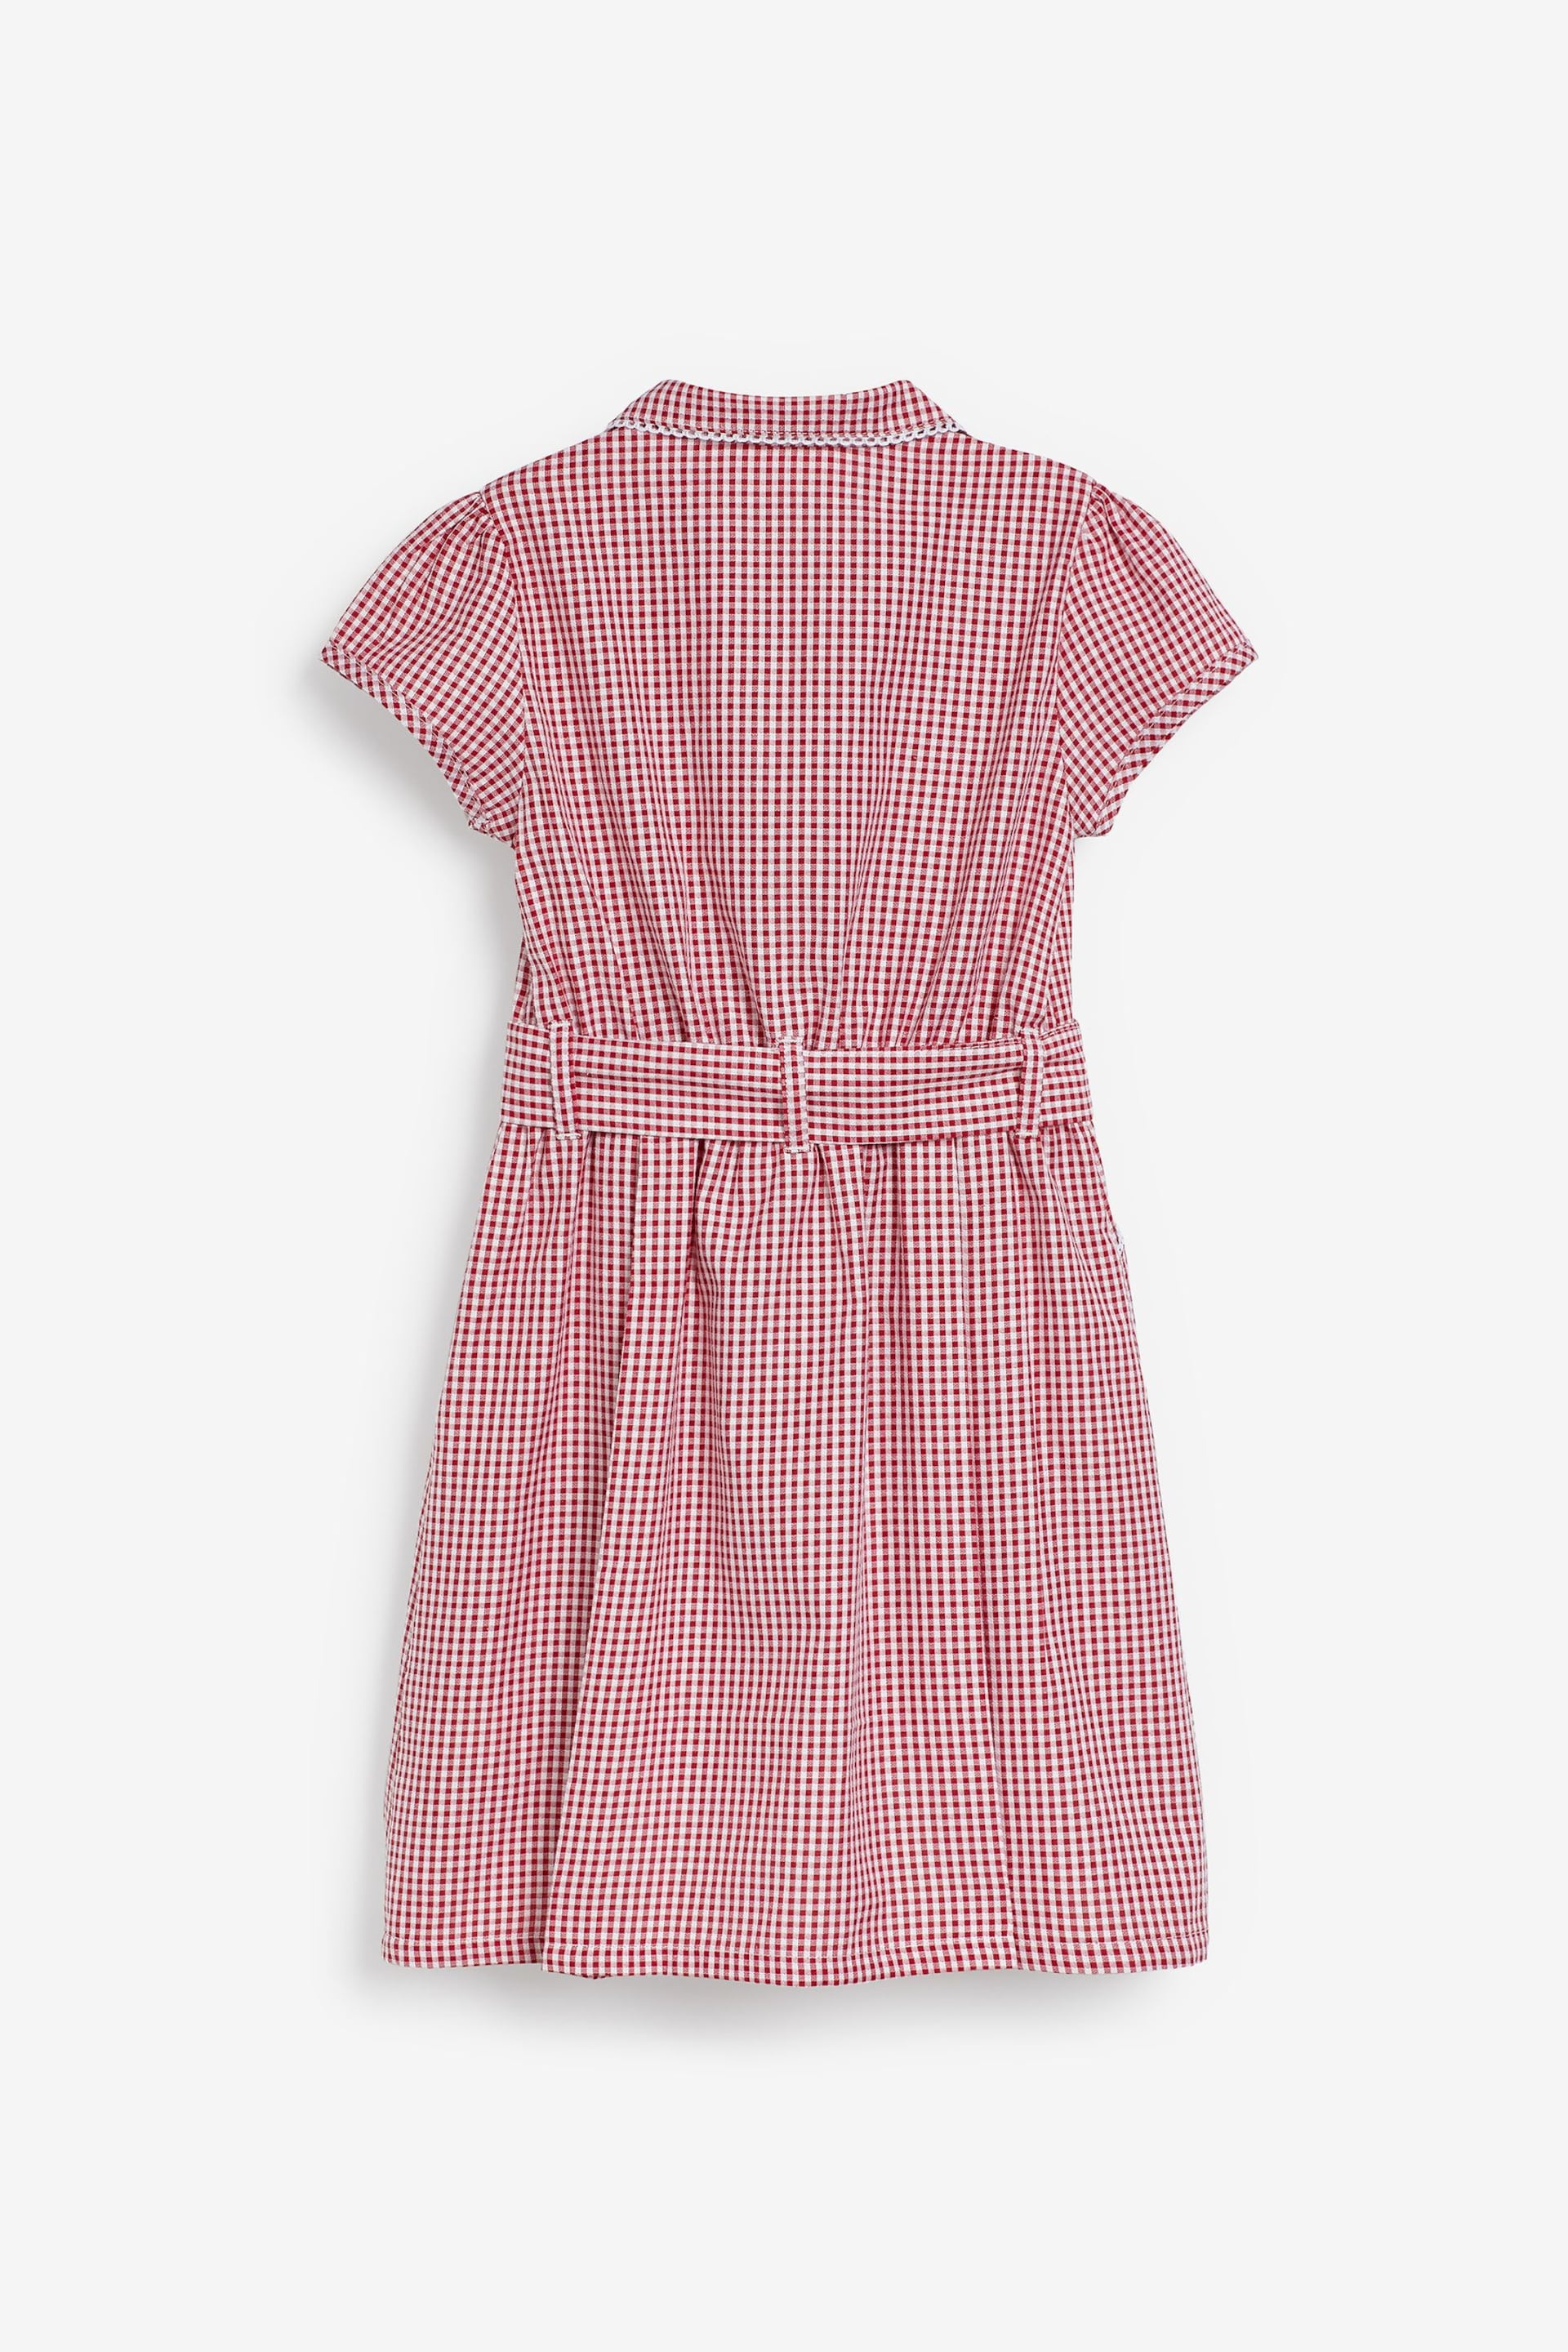 Red Gingham Cotton Rich Belted School Dress With Scrunchie (3-14yrs) - Image 6 of 9